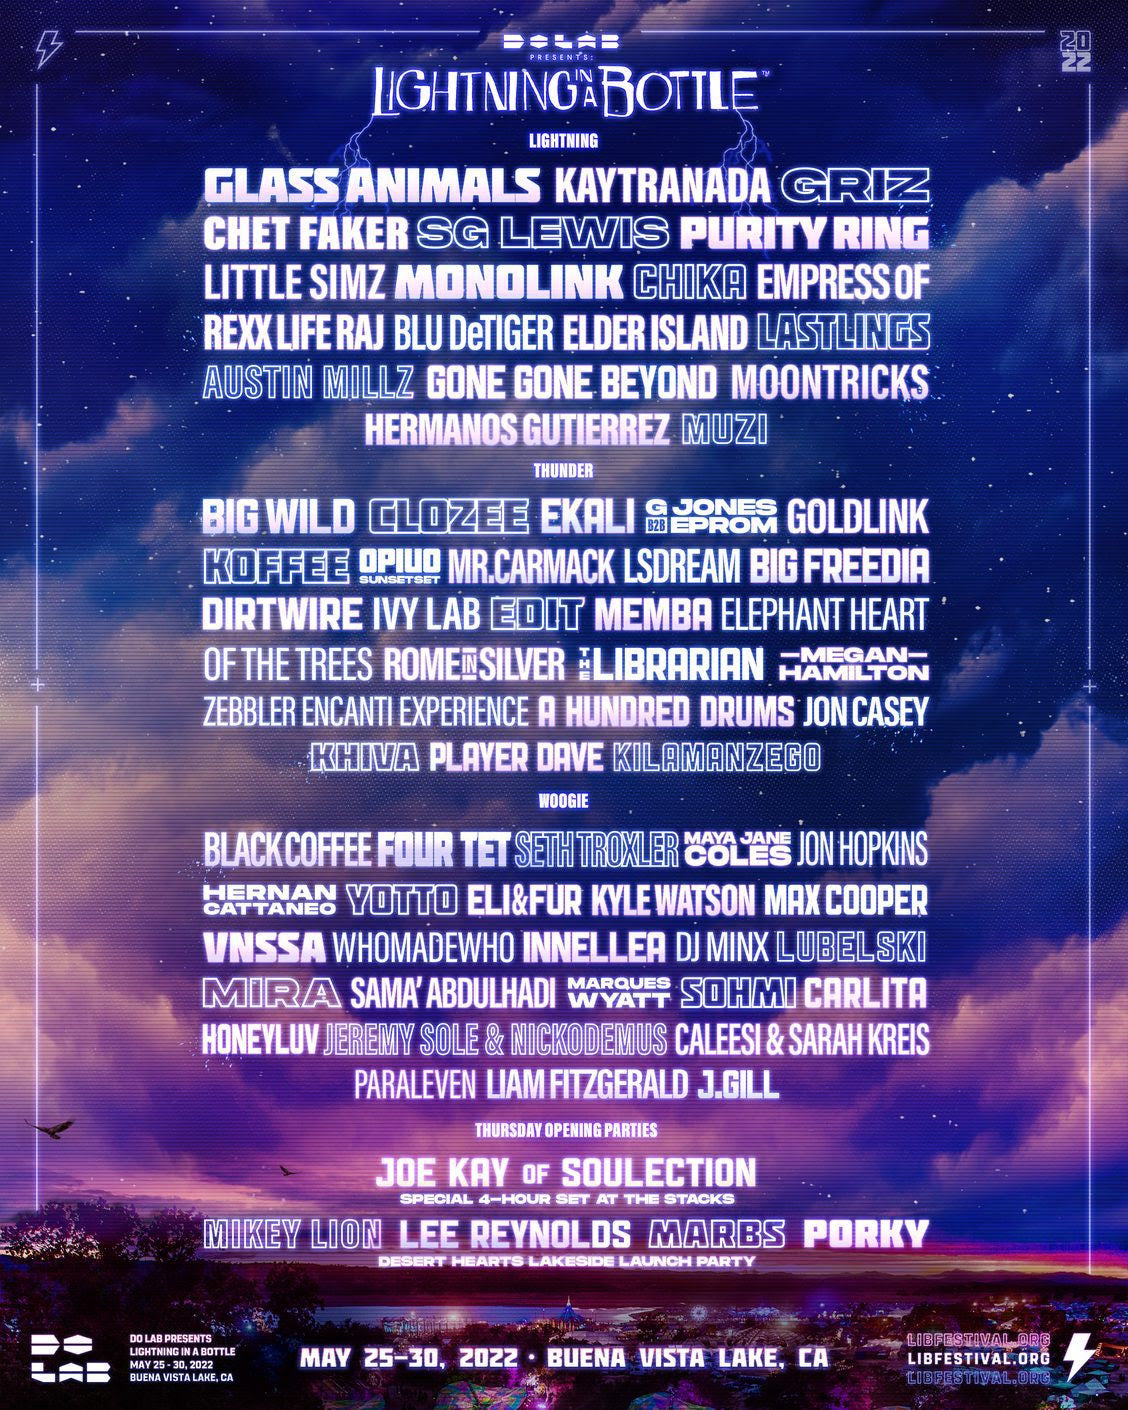 Lightning in a Bottle & Do LaB Announce Phase Two Lineup Featuring The Stacks, The Junkyard, and The Grand Artique Stages